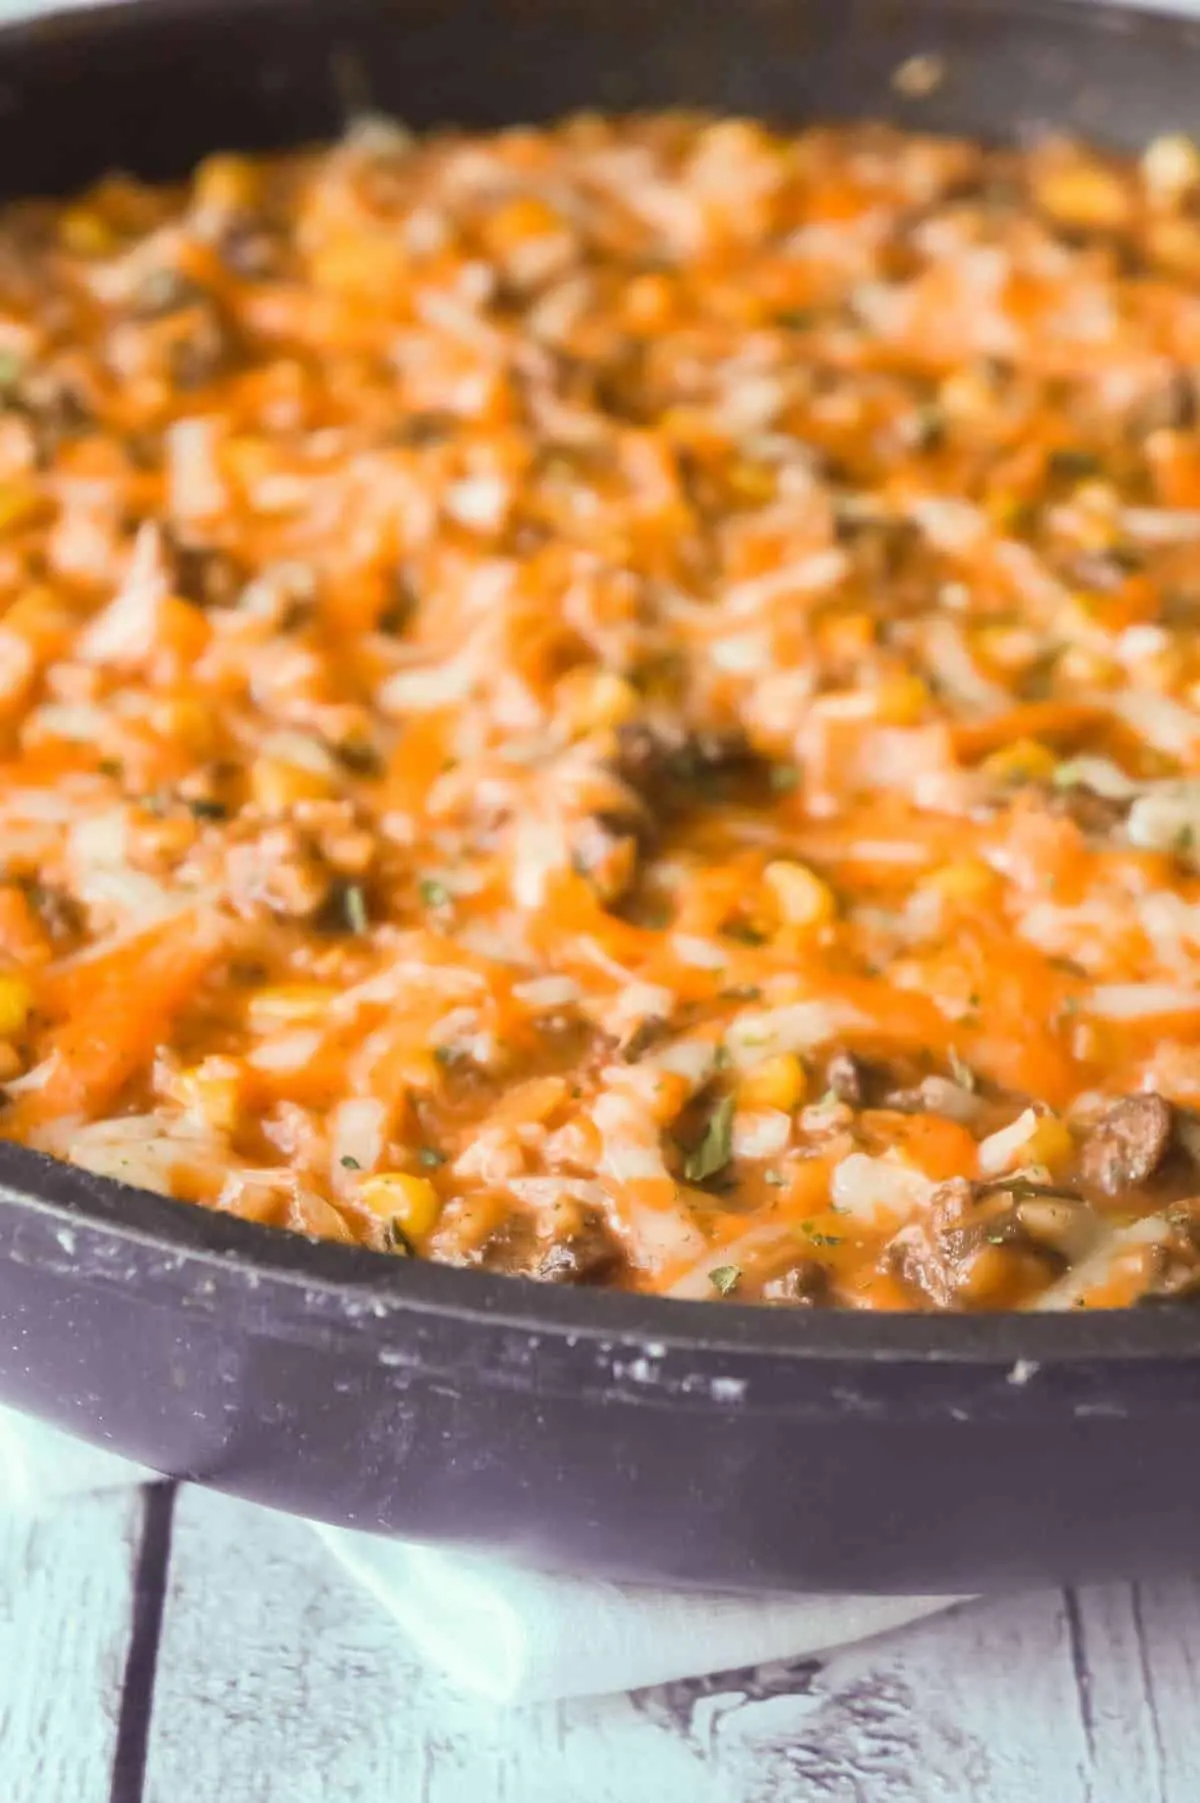 Cheesy Tomato Ground Beef and Rice is an easy ground beef dish loaded with corn, cheese and rice all tossed in a creamy tomato sauce.